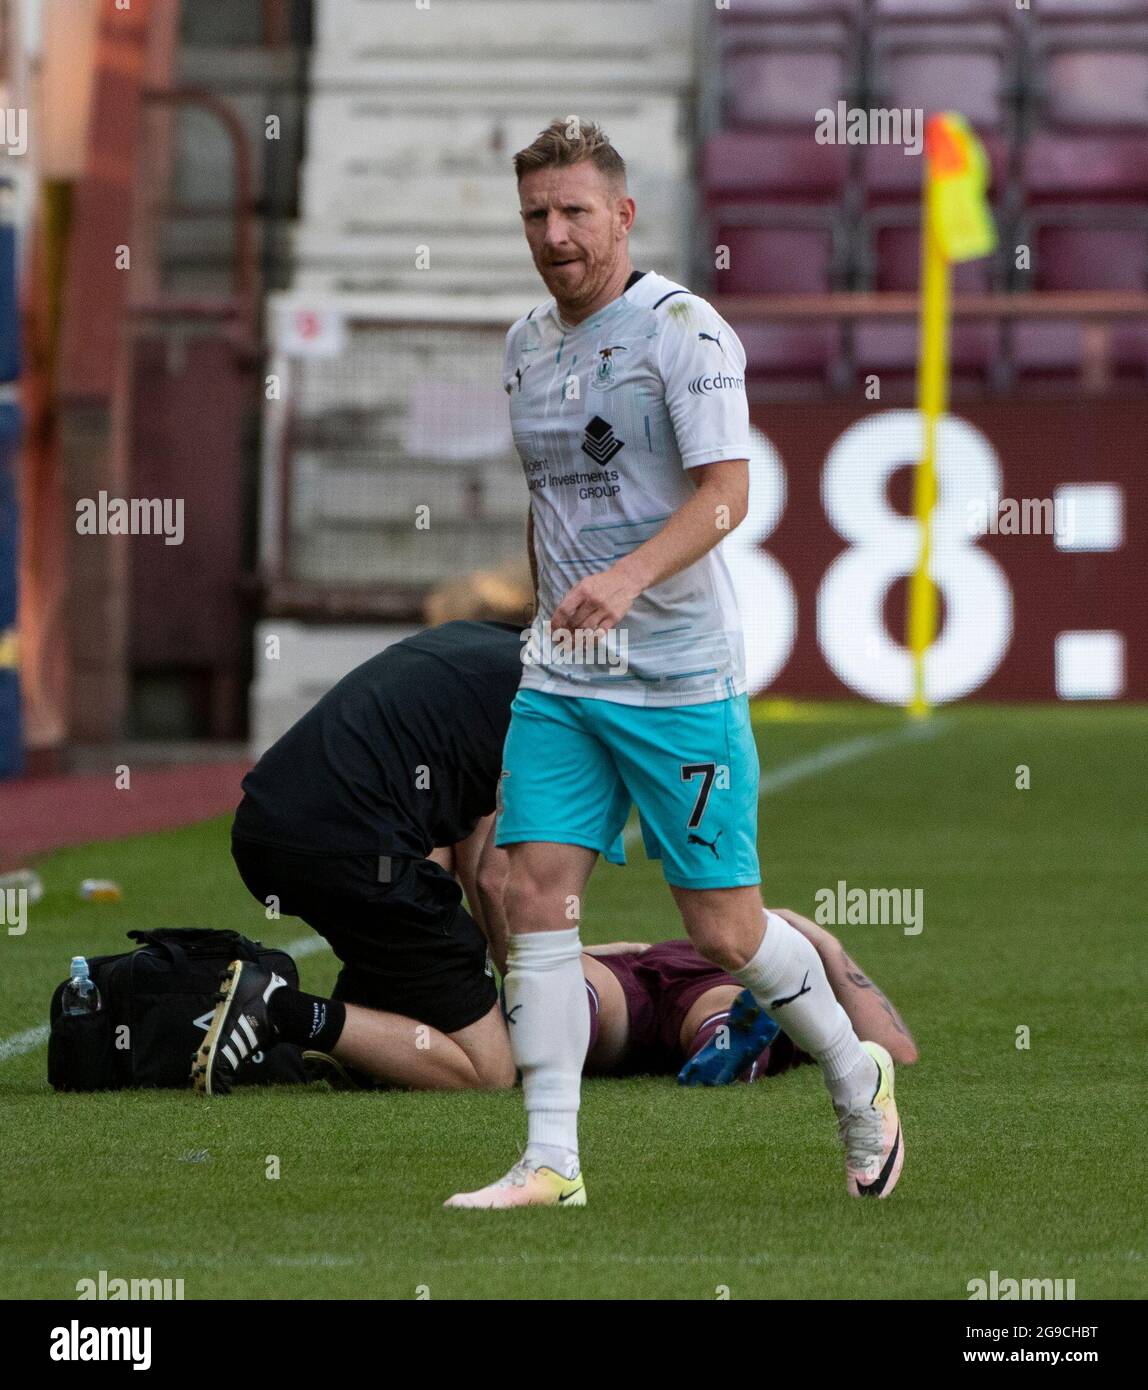 Edinburgh, UK. 25th July, 2021. Premier Sports Cup - Heart of Midlothian v Inverness Caledonian Thistle 25/7/2021. Hearts play host to Inverness Caledonian Thistle in the Premier Sports Cup at tynecastle Park, Edinburgh, Midlothian. Pic shows: Inverness Caley forward, Michael Gardyne, leaves the field after being red carded for a bad foul on Hearts' attacking midfielder, Jamie Walker. Credit: Ian Jacobs/Alamy Live News Stock Photo